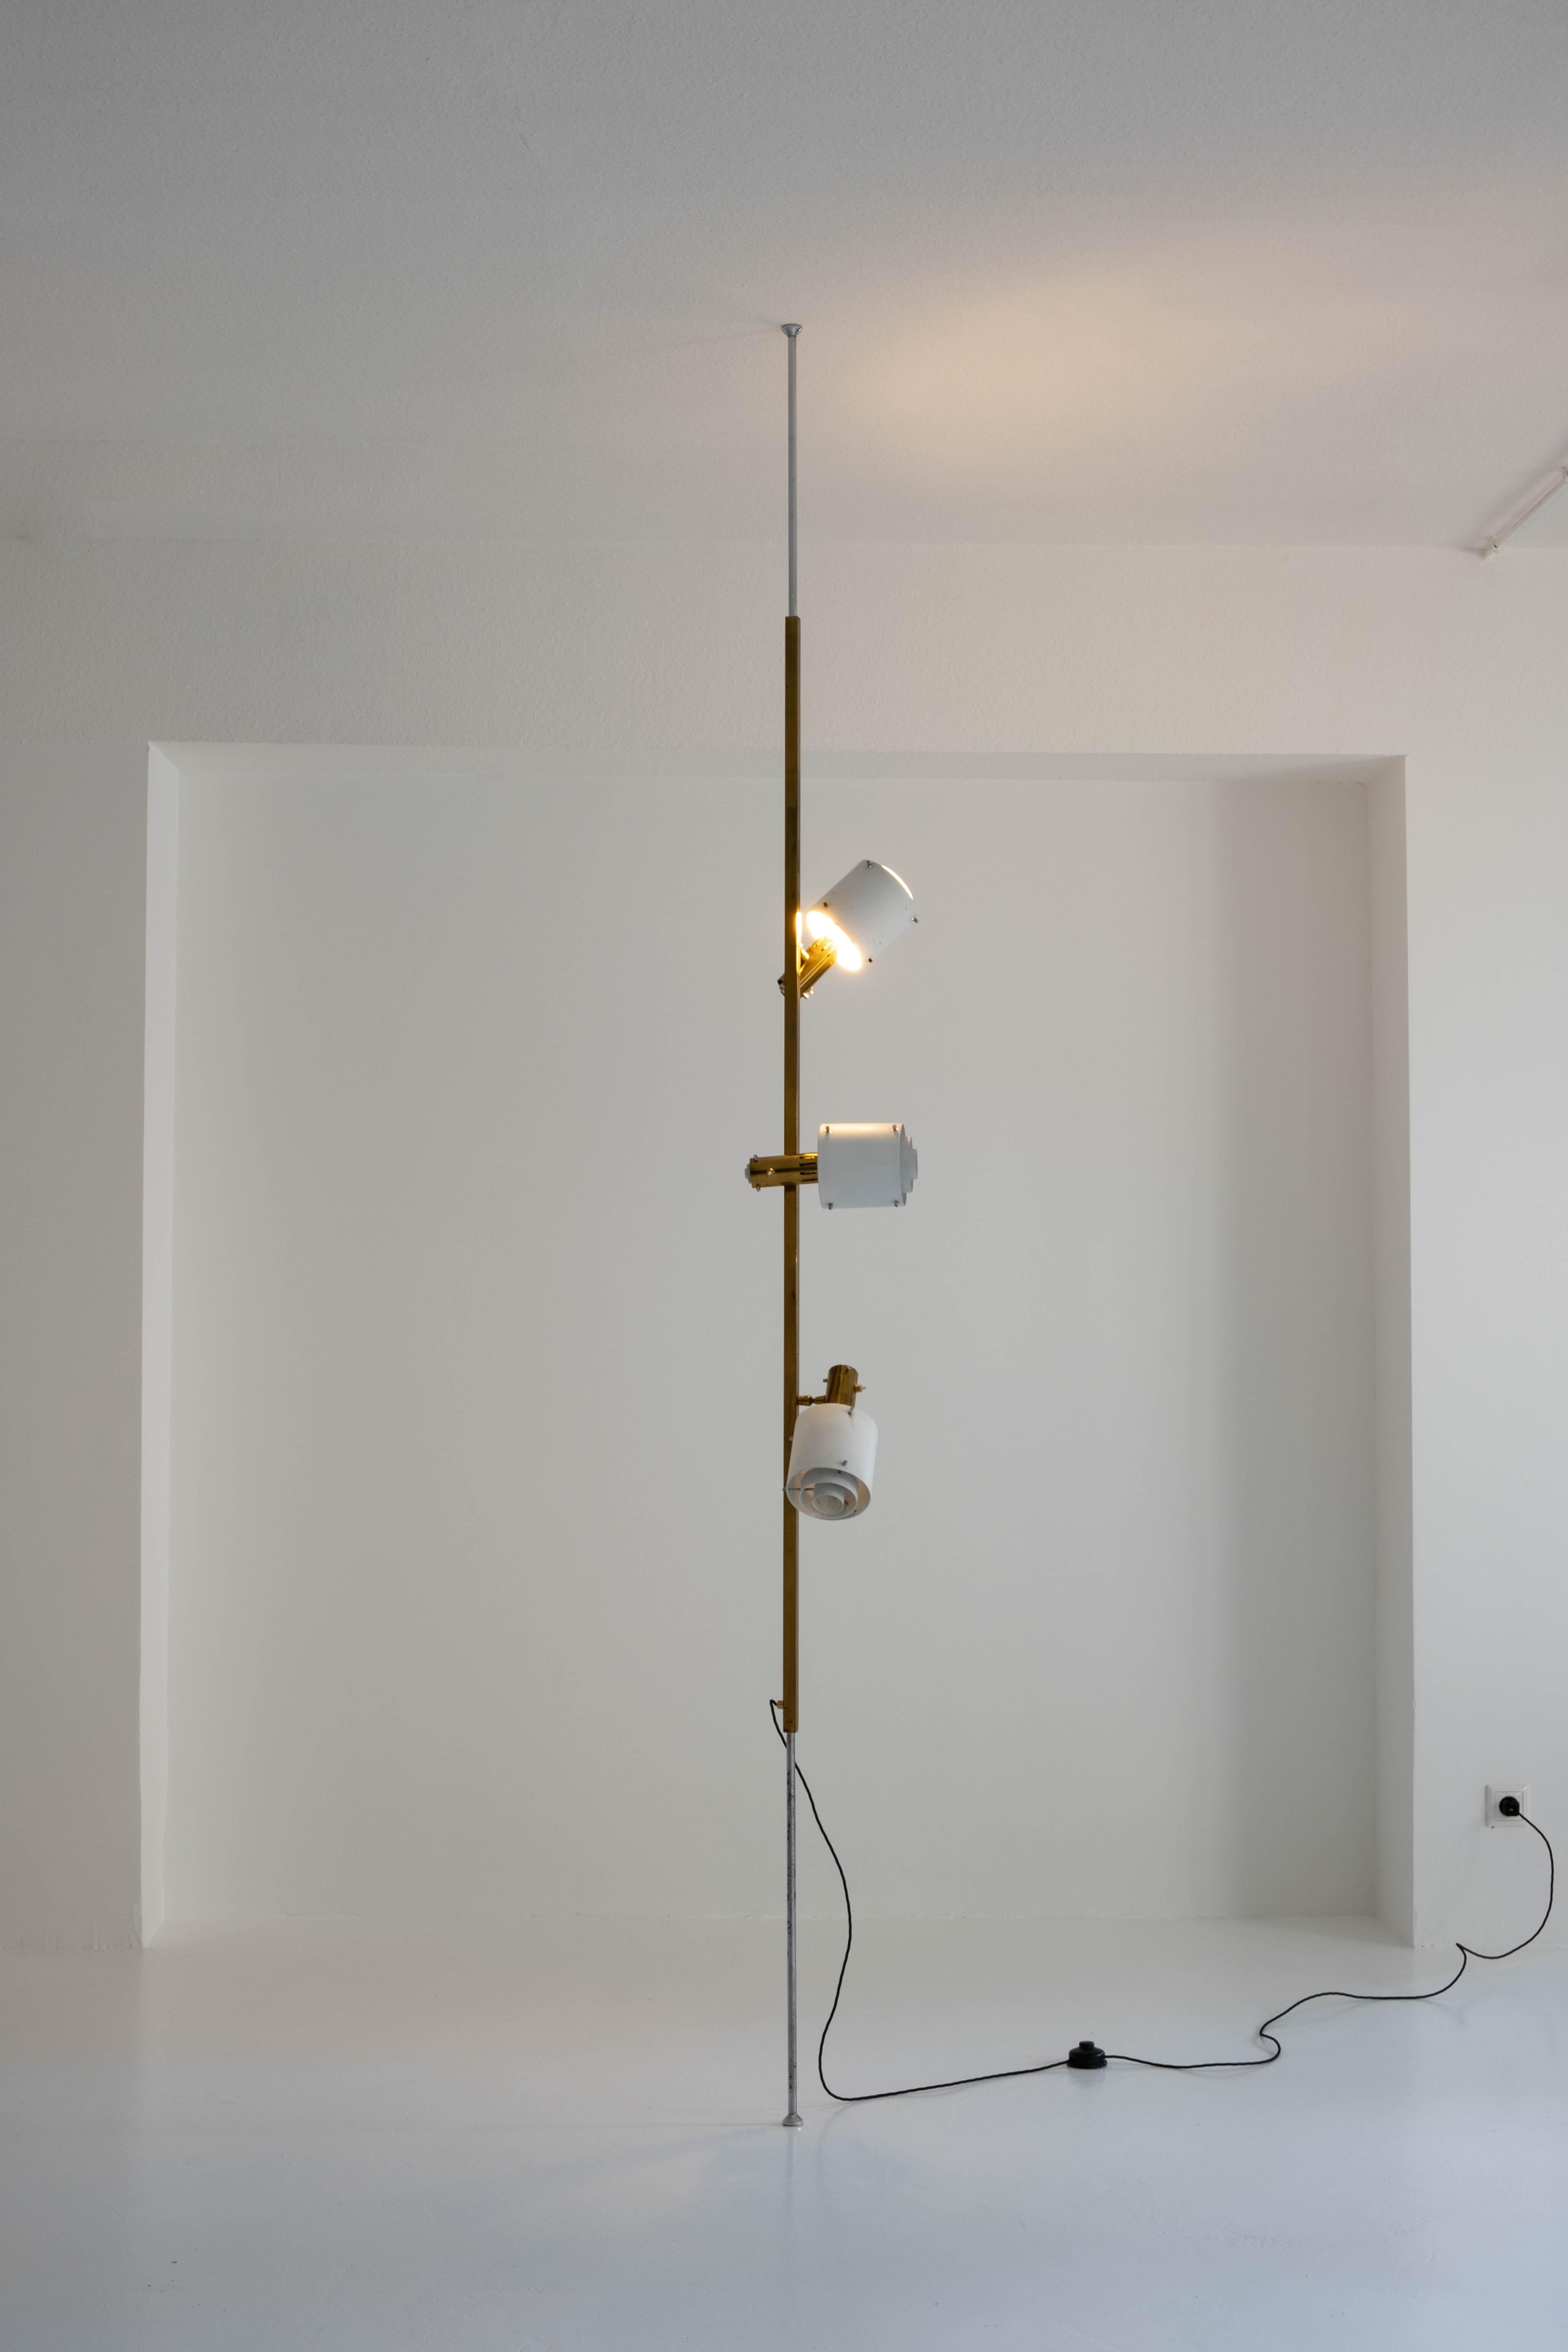 20th Century Unique Luminaire/ Light / Floor Lamp Clamped Between the Ceiling and Floor